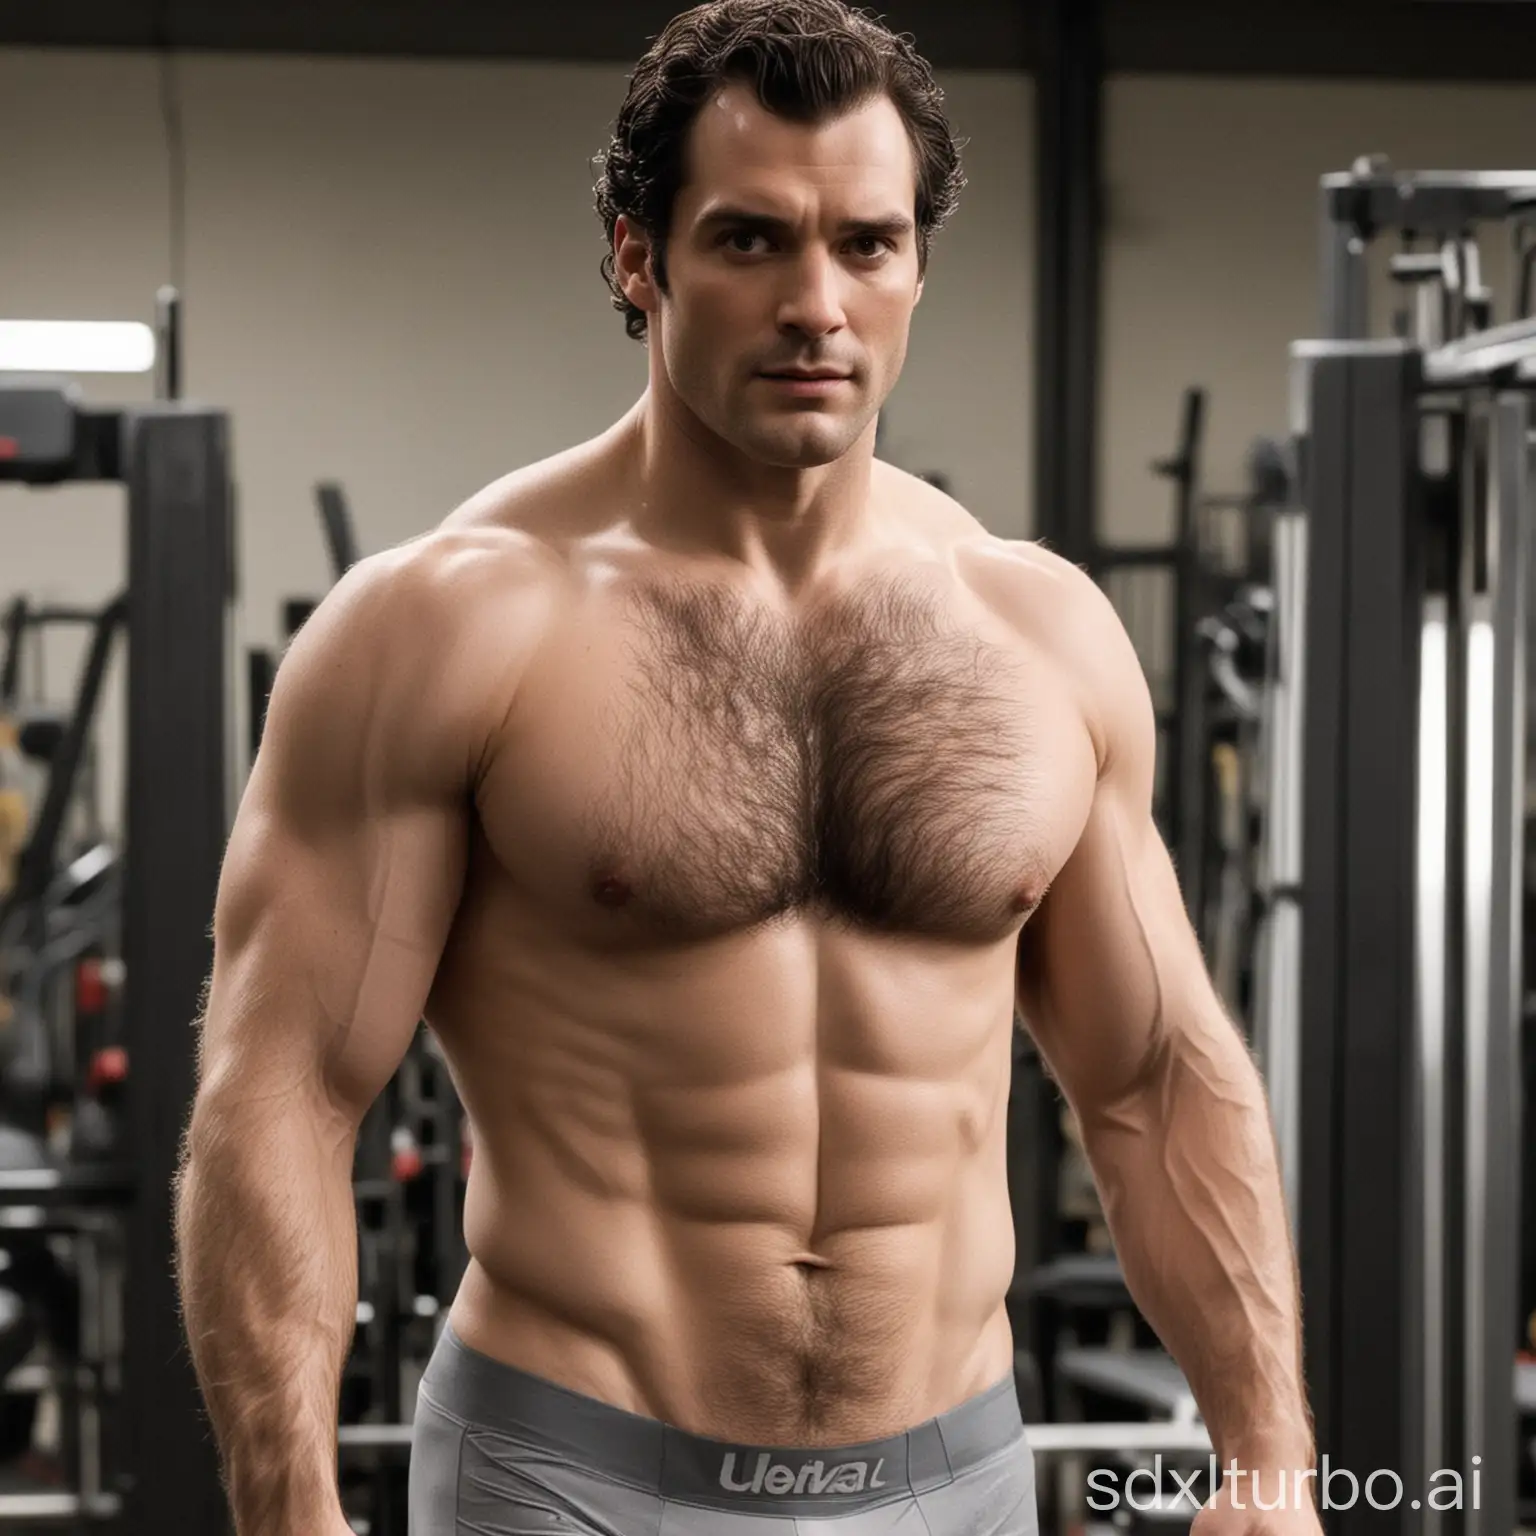 henry cavil  with hairy chest in the gym, wear tight underpants, with a large swelling  under underpants